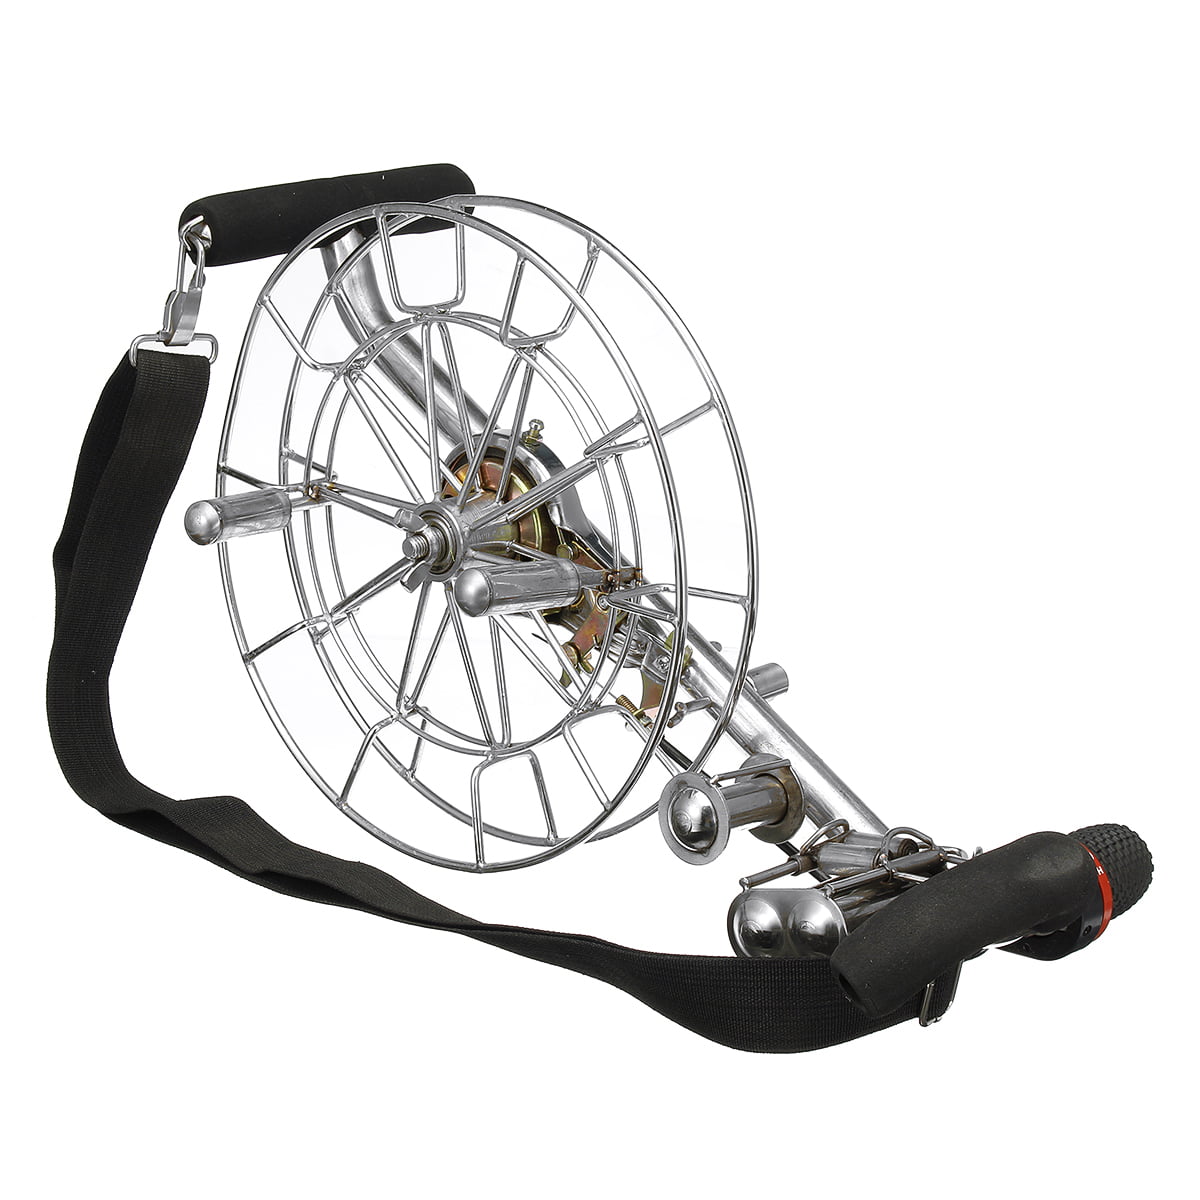 PROFESSIONAL 11" Strong Stainless Kite Line Winder Reel Brakes Control Adult 